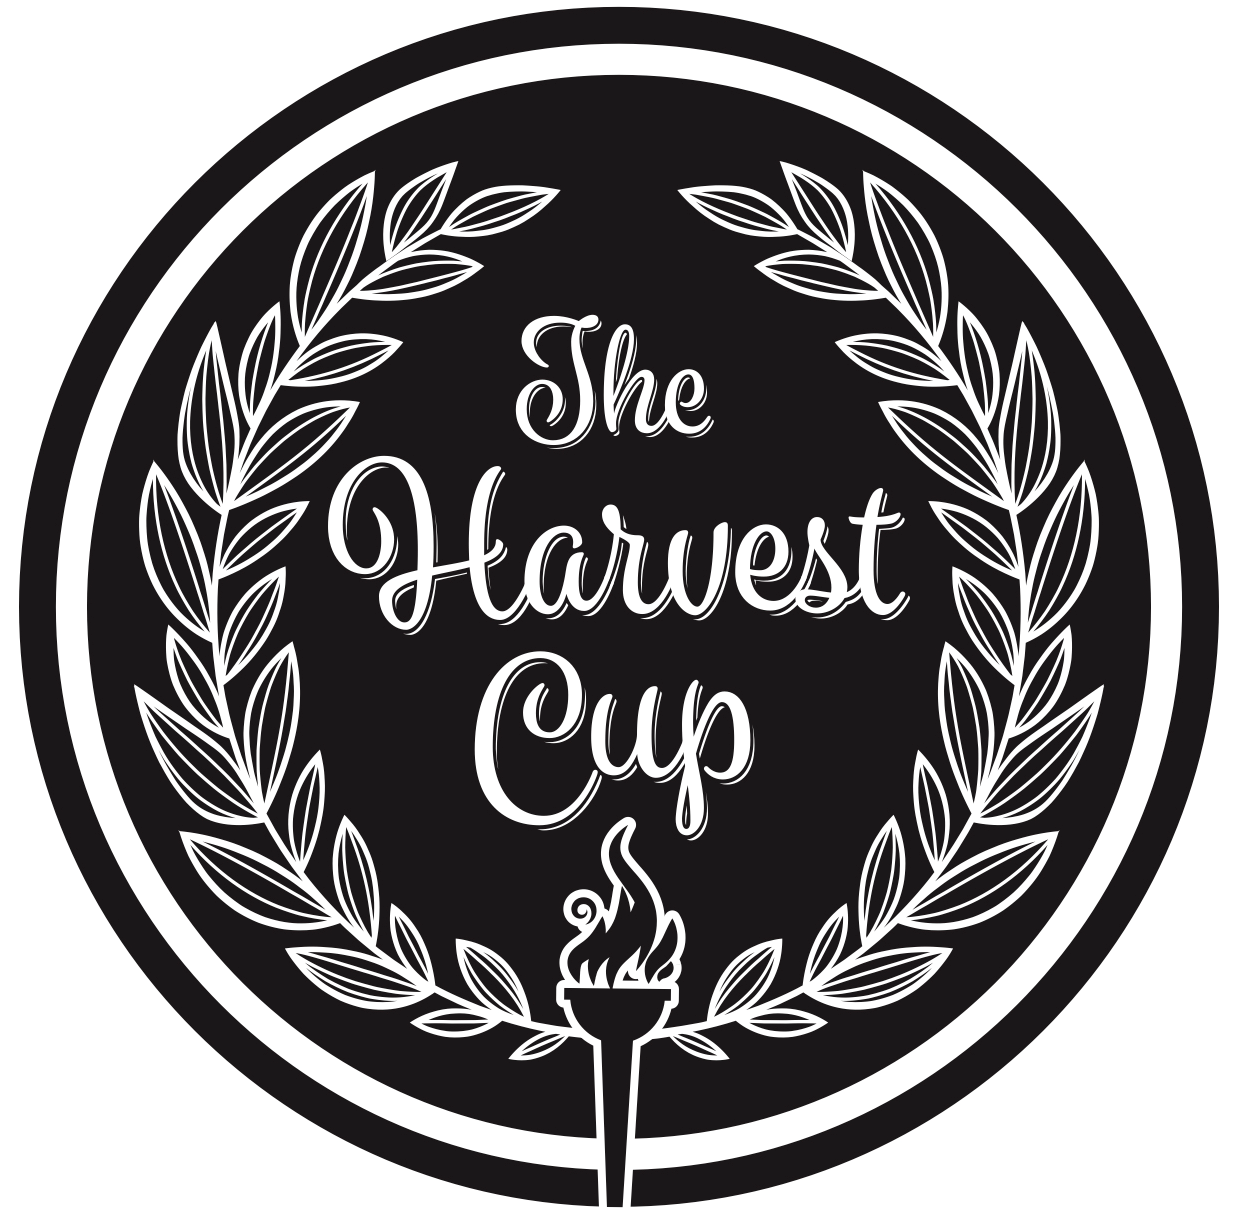 The Harvest Cup